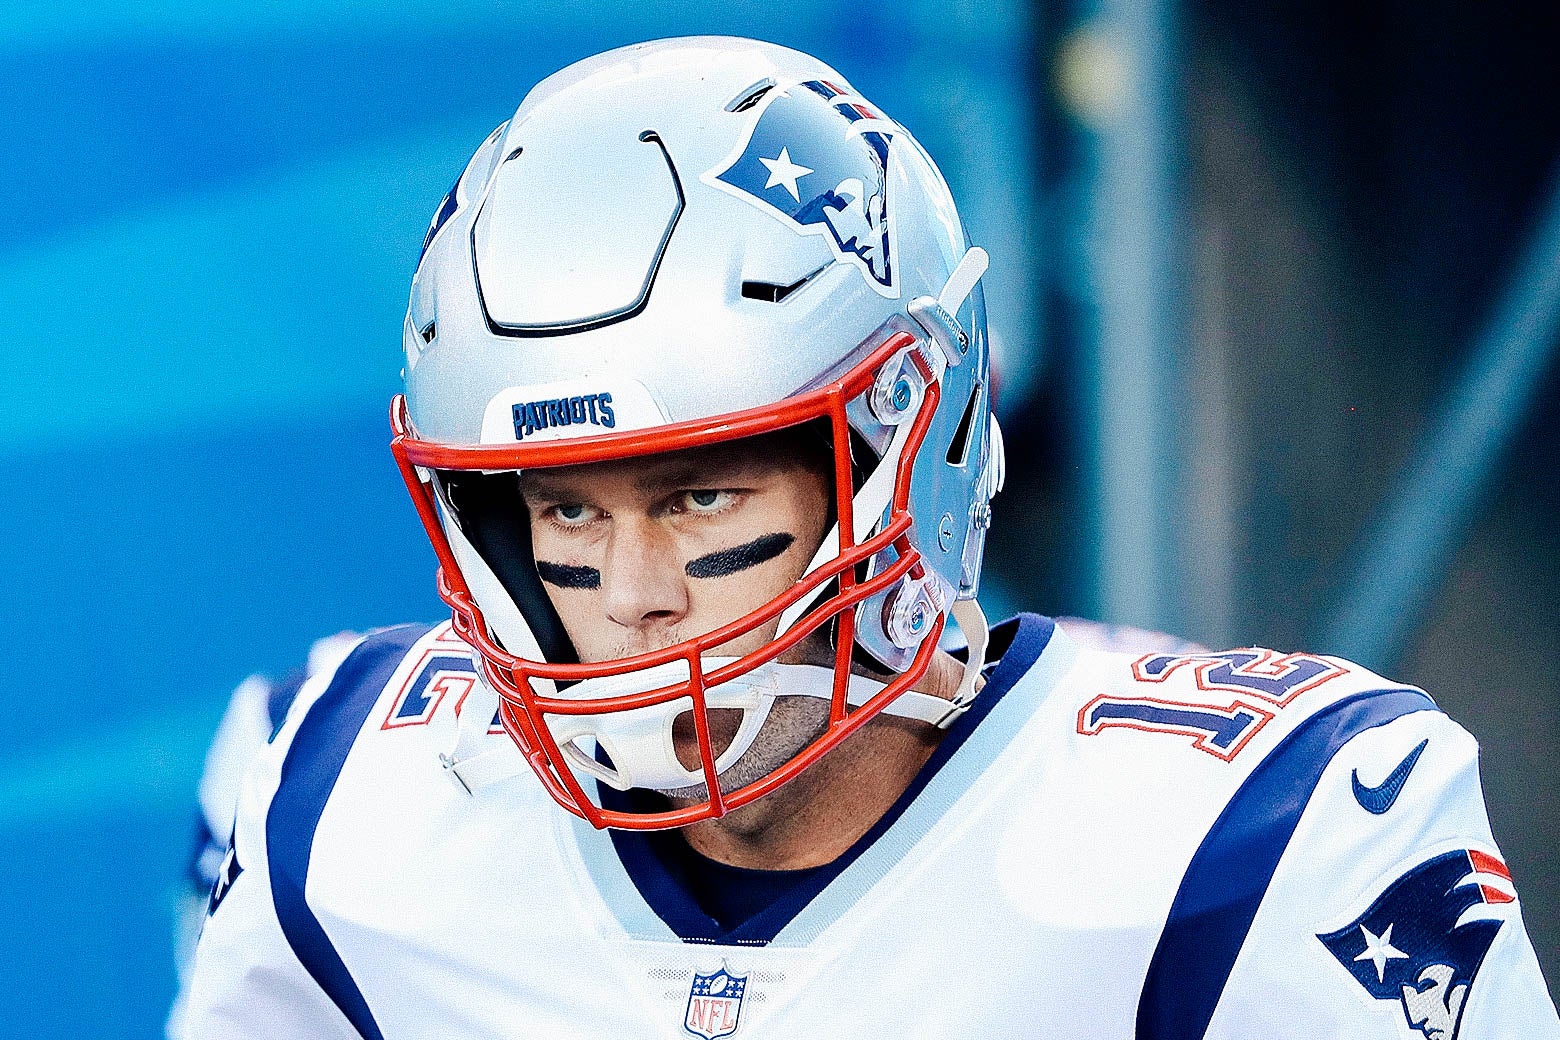 Tom Brady takes the field at Bank of America Stadium on Aug. 24 in Charlotte, North Carolina.